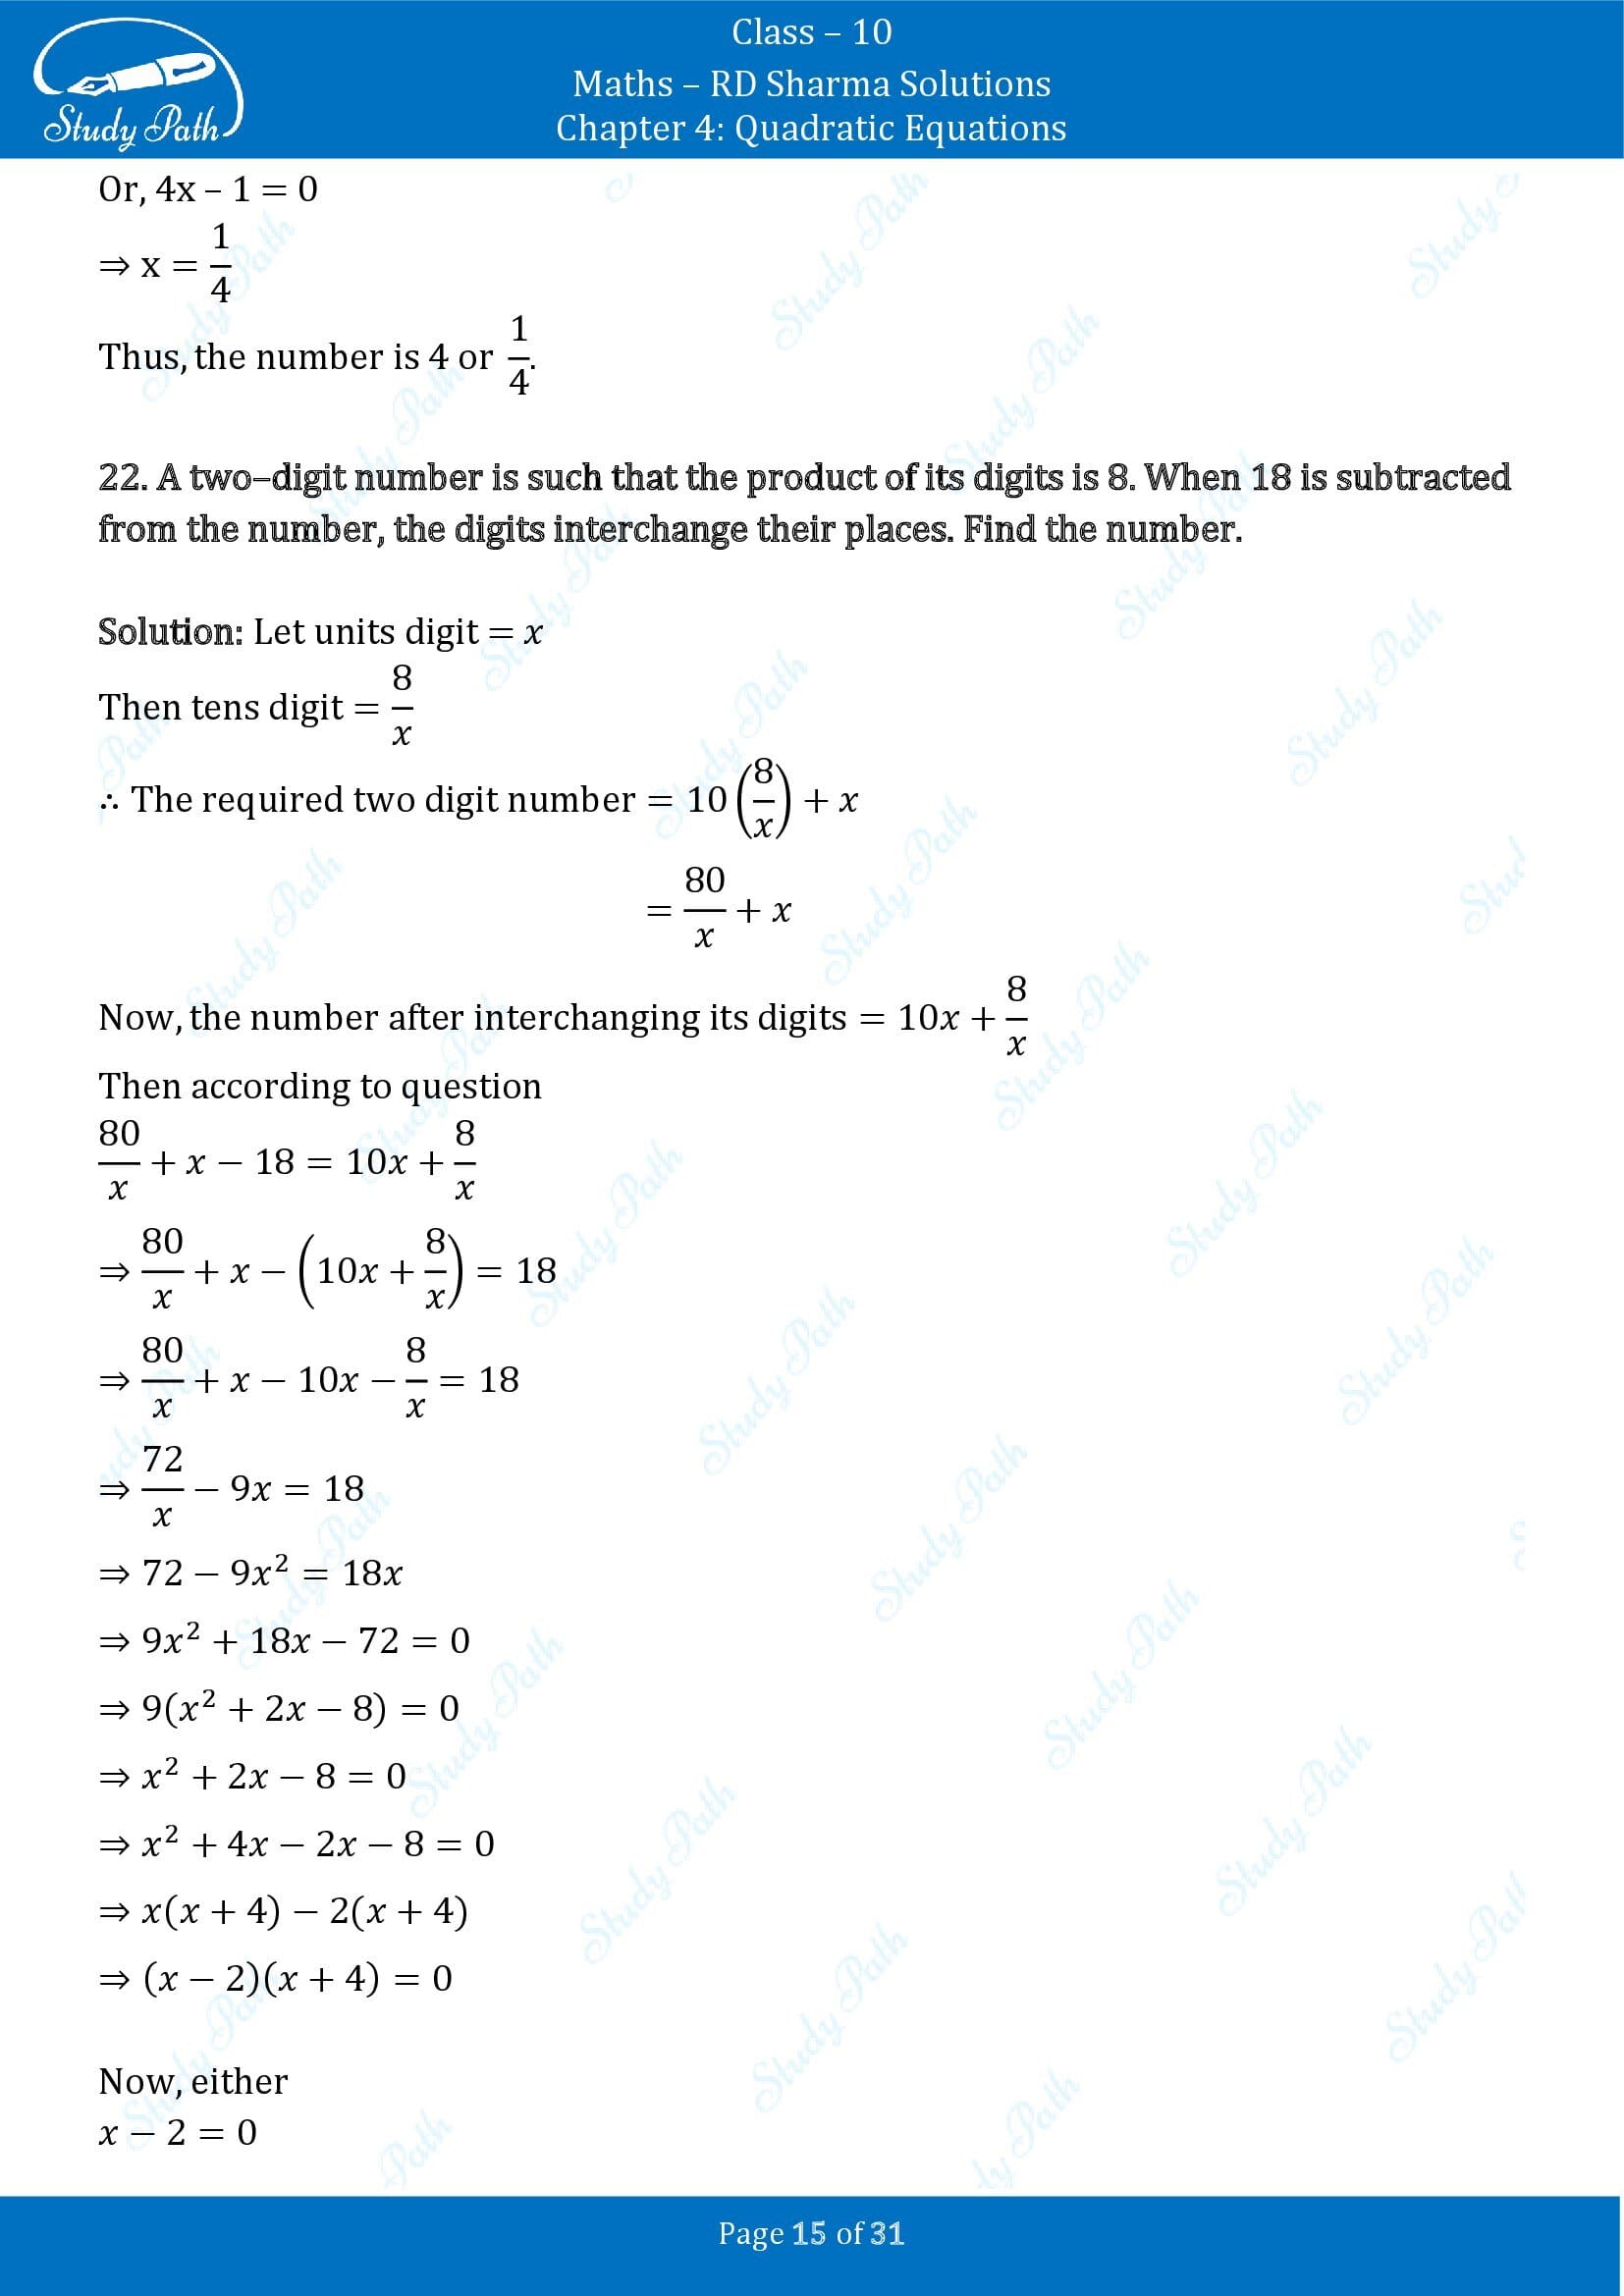 RD Sharma Solutions Class 10 Chapter 4 Quadratic Equations Exercise 4.7 00015